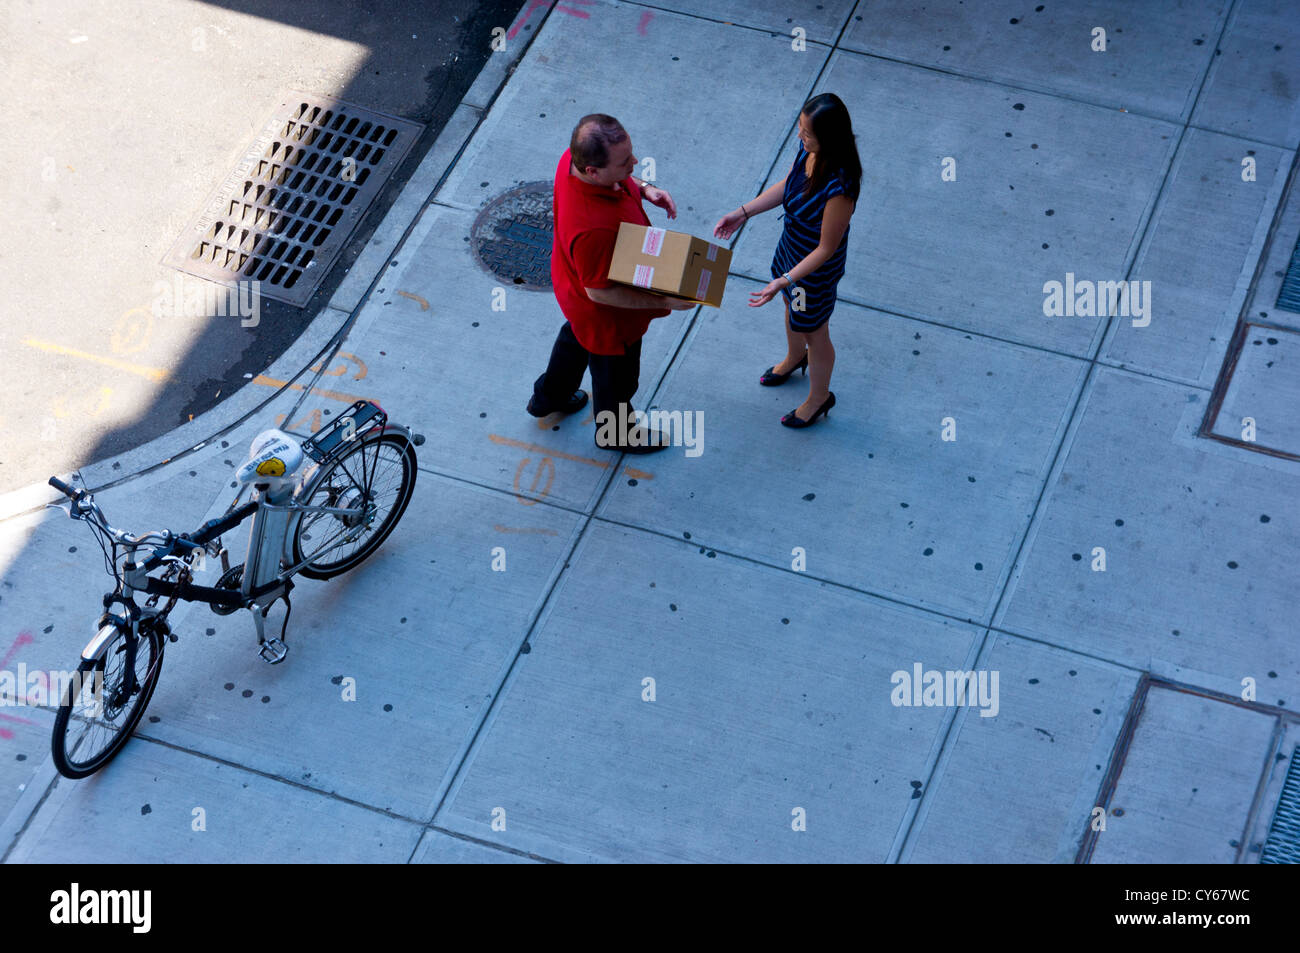 An courier delivers a parcel - an everyday New York street scene viewed from the High Line city park, Manhattan, New York. Stock Photo